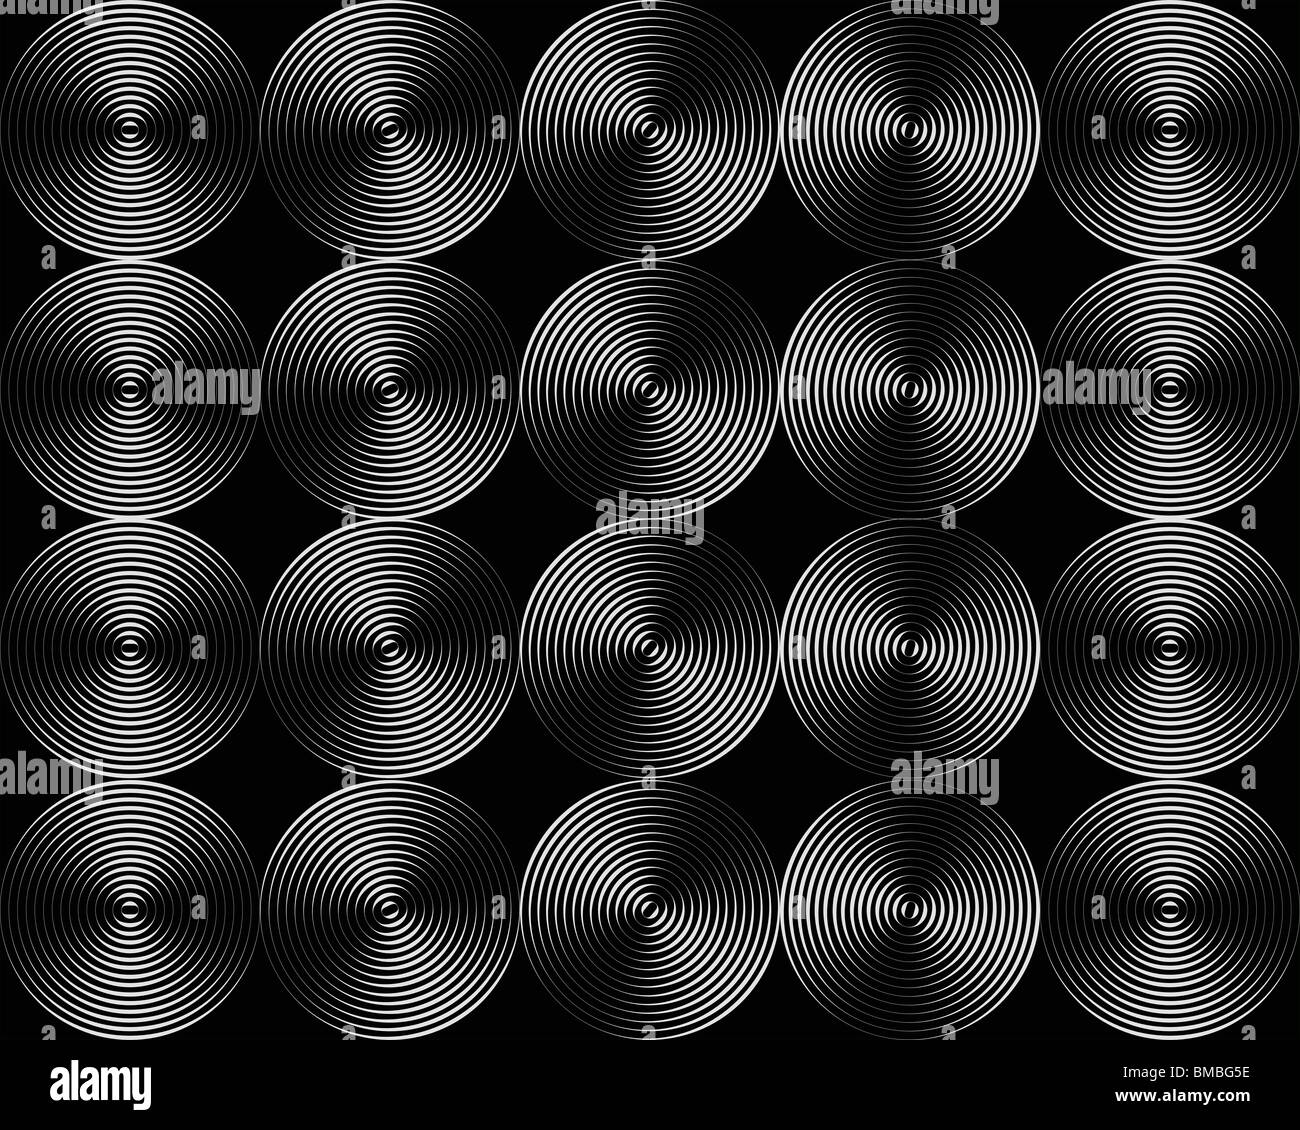 Metallic shimmering background picture out of many grey circle lines Stock Photo